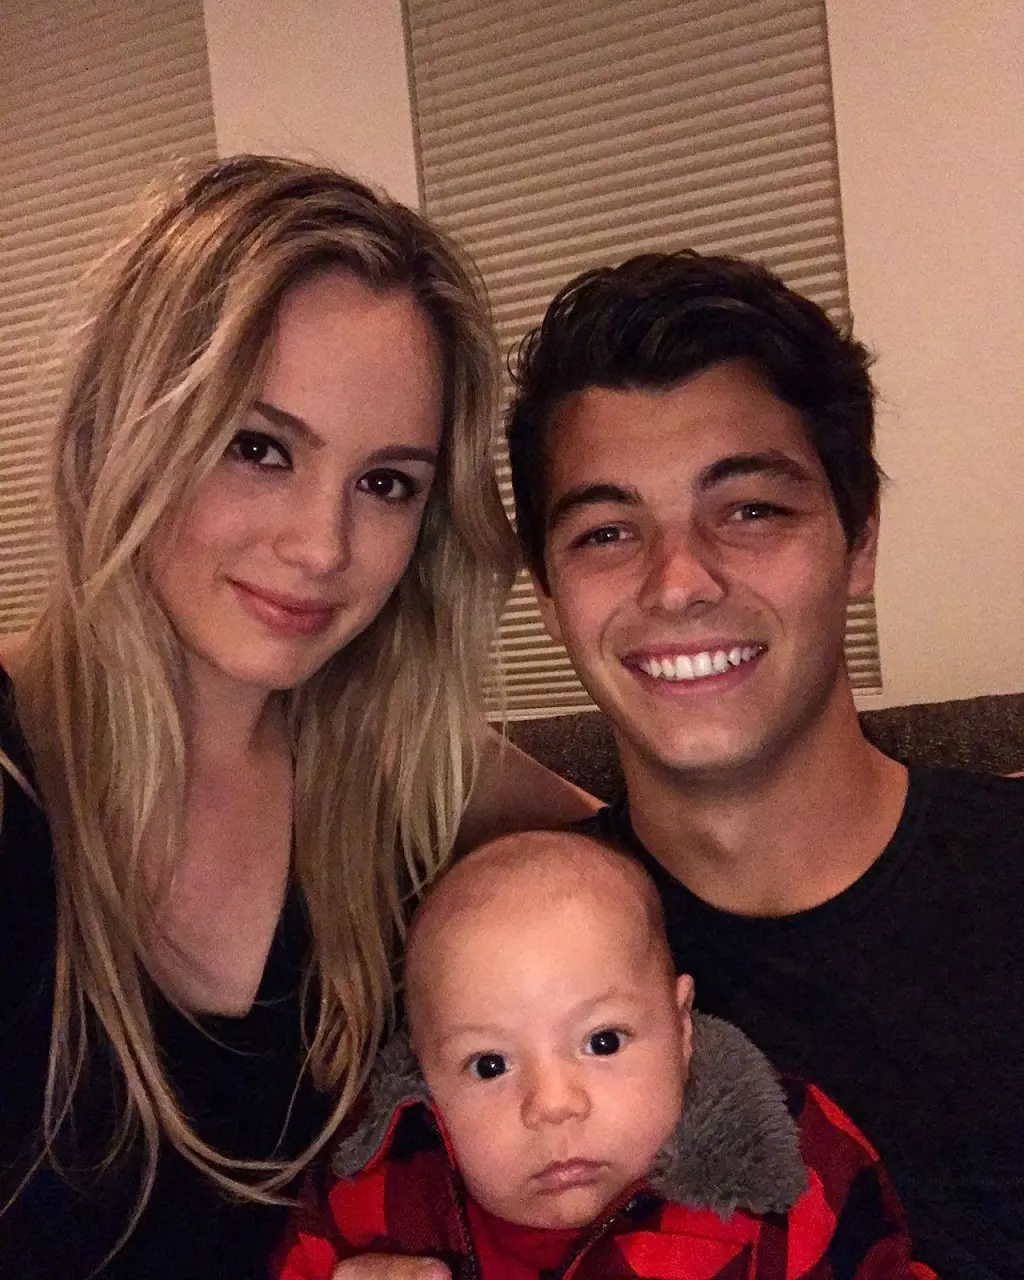 The divorced Fritz couple with their newly born child in April 2017.